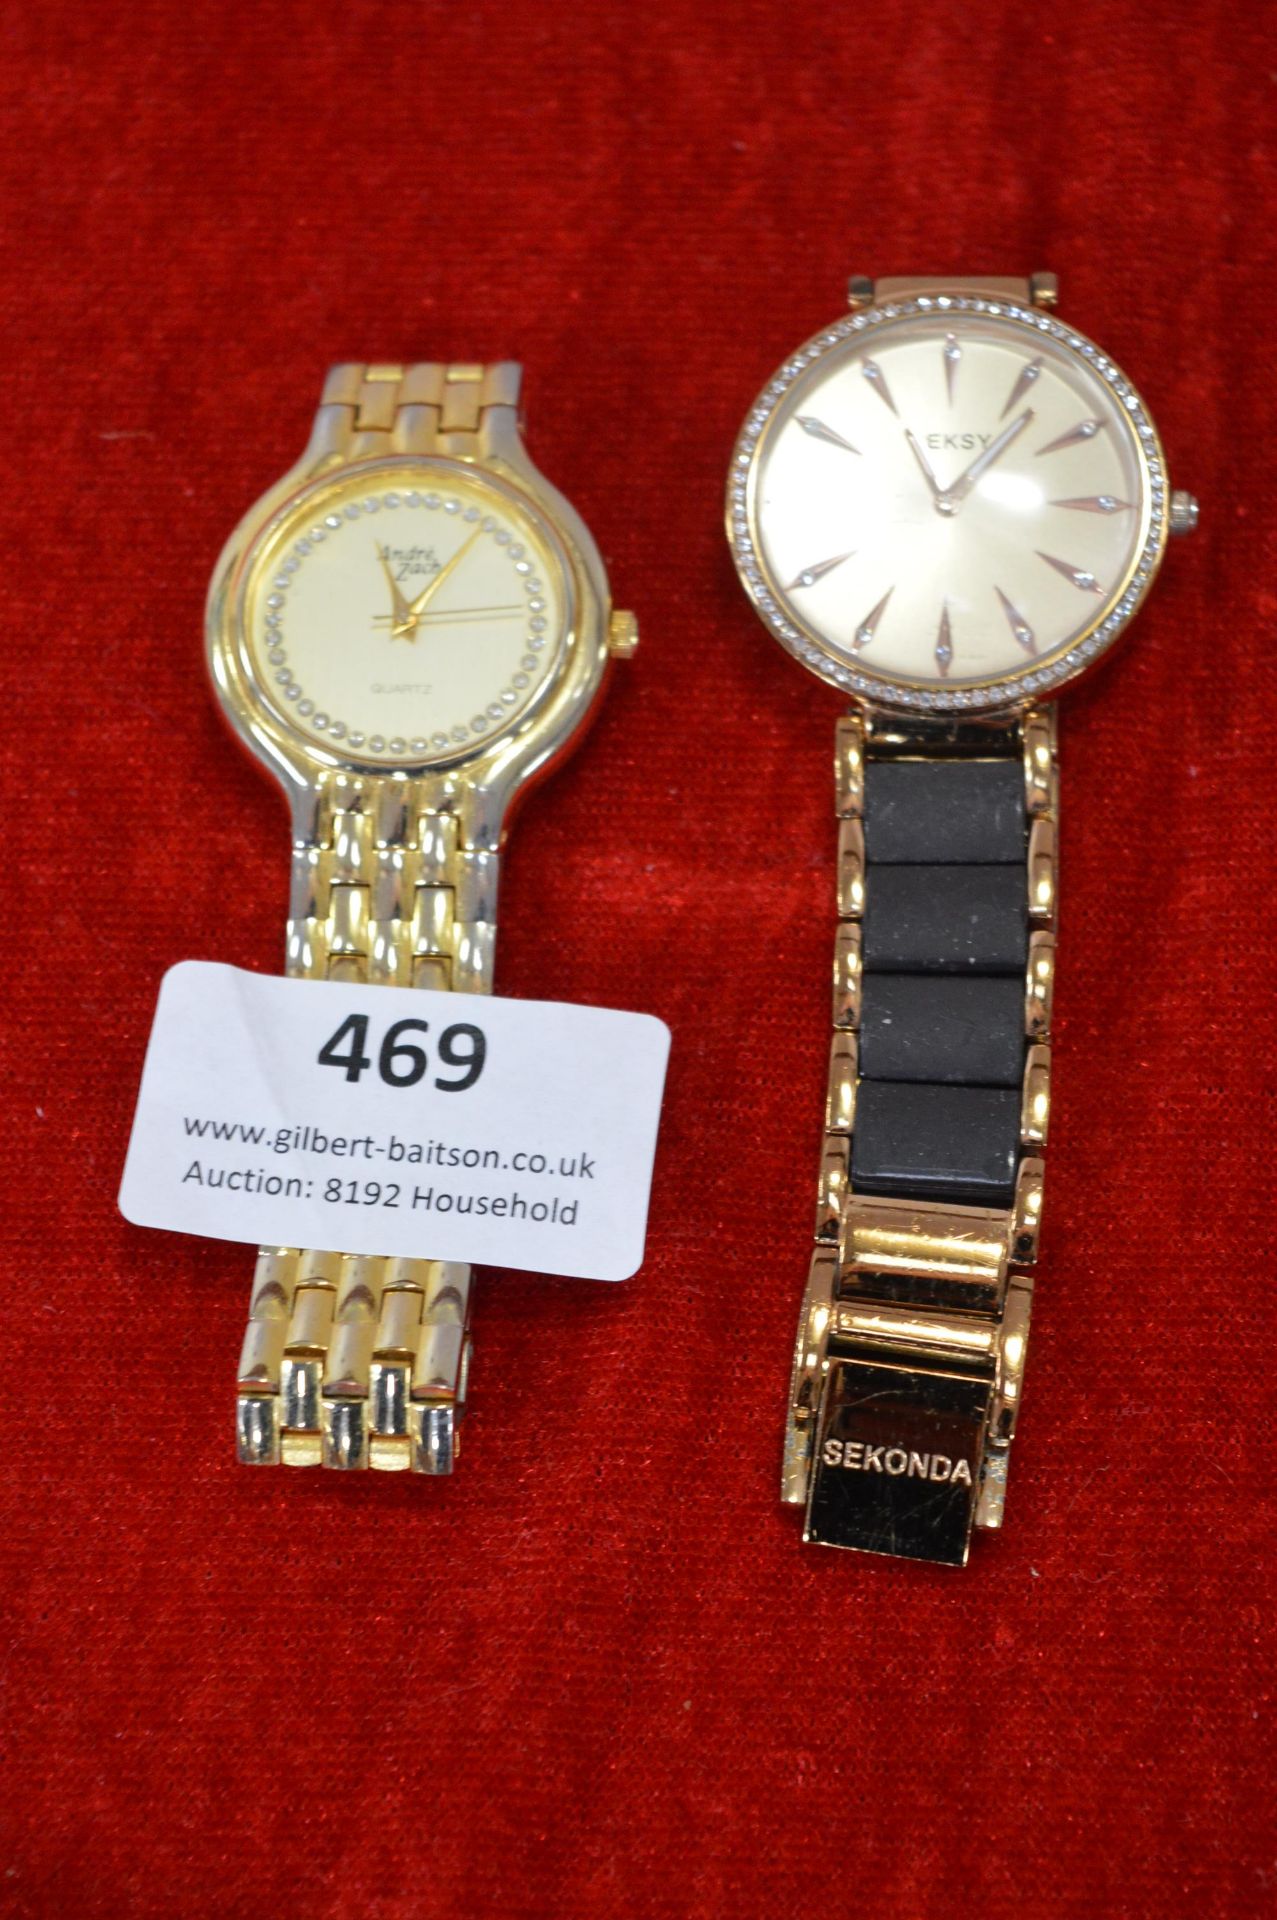 Two Ladies Wristwatches - Seksy & Andre Zach